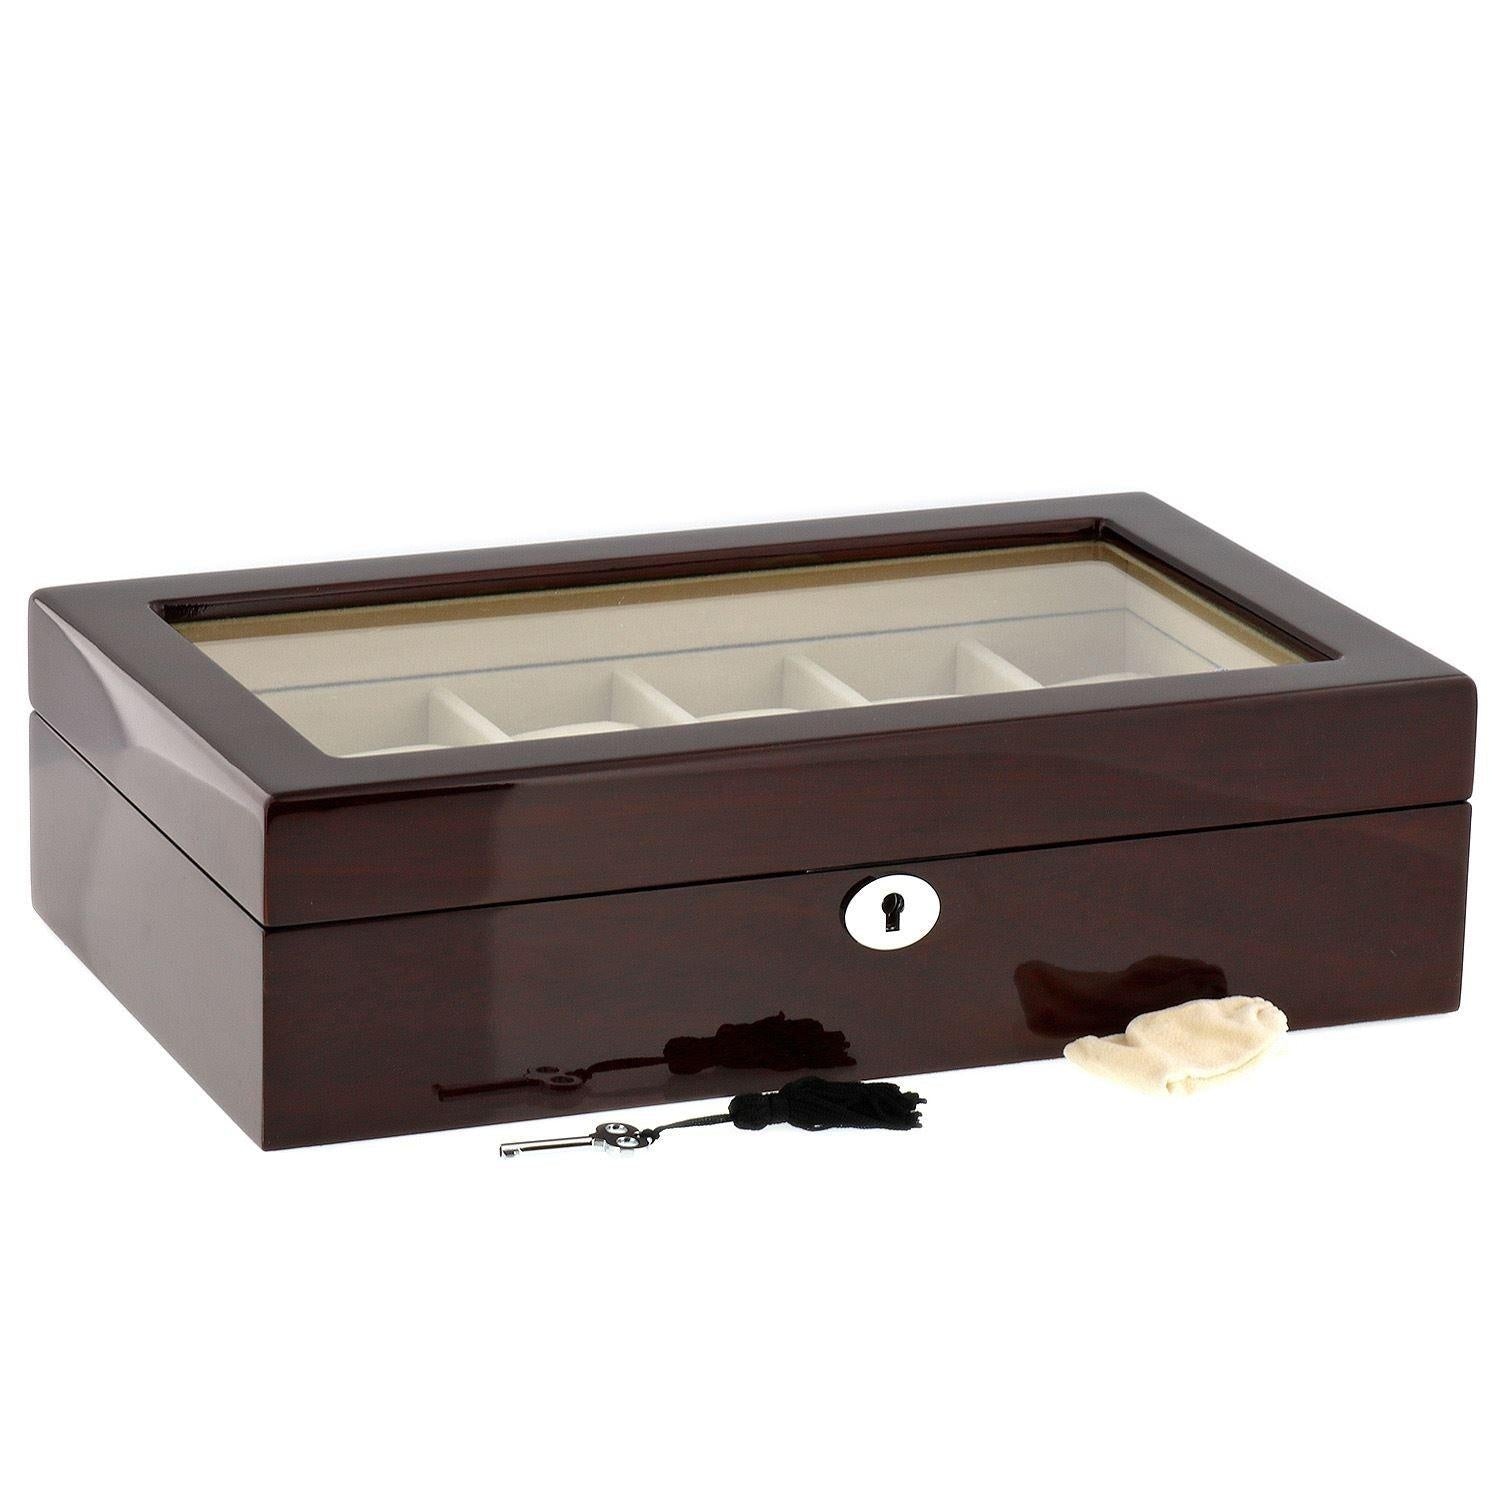 High Quality Watch Collectors Box for 12 Watches with Mahogany Veneer High Gloss Finish by Tempus